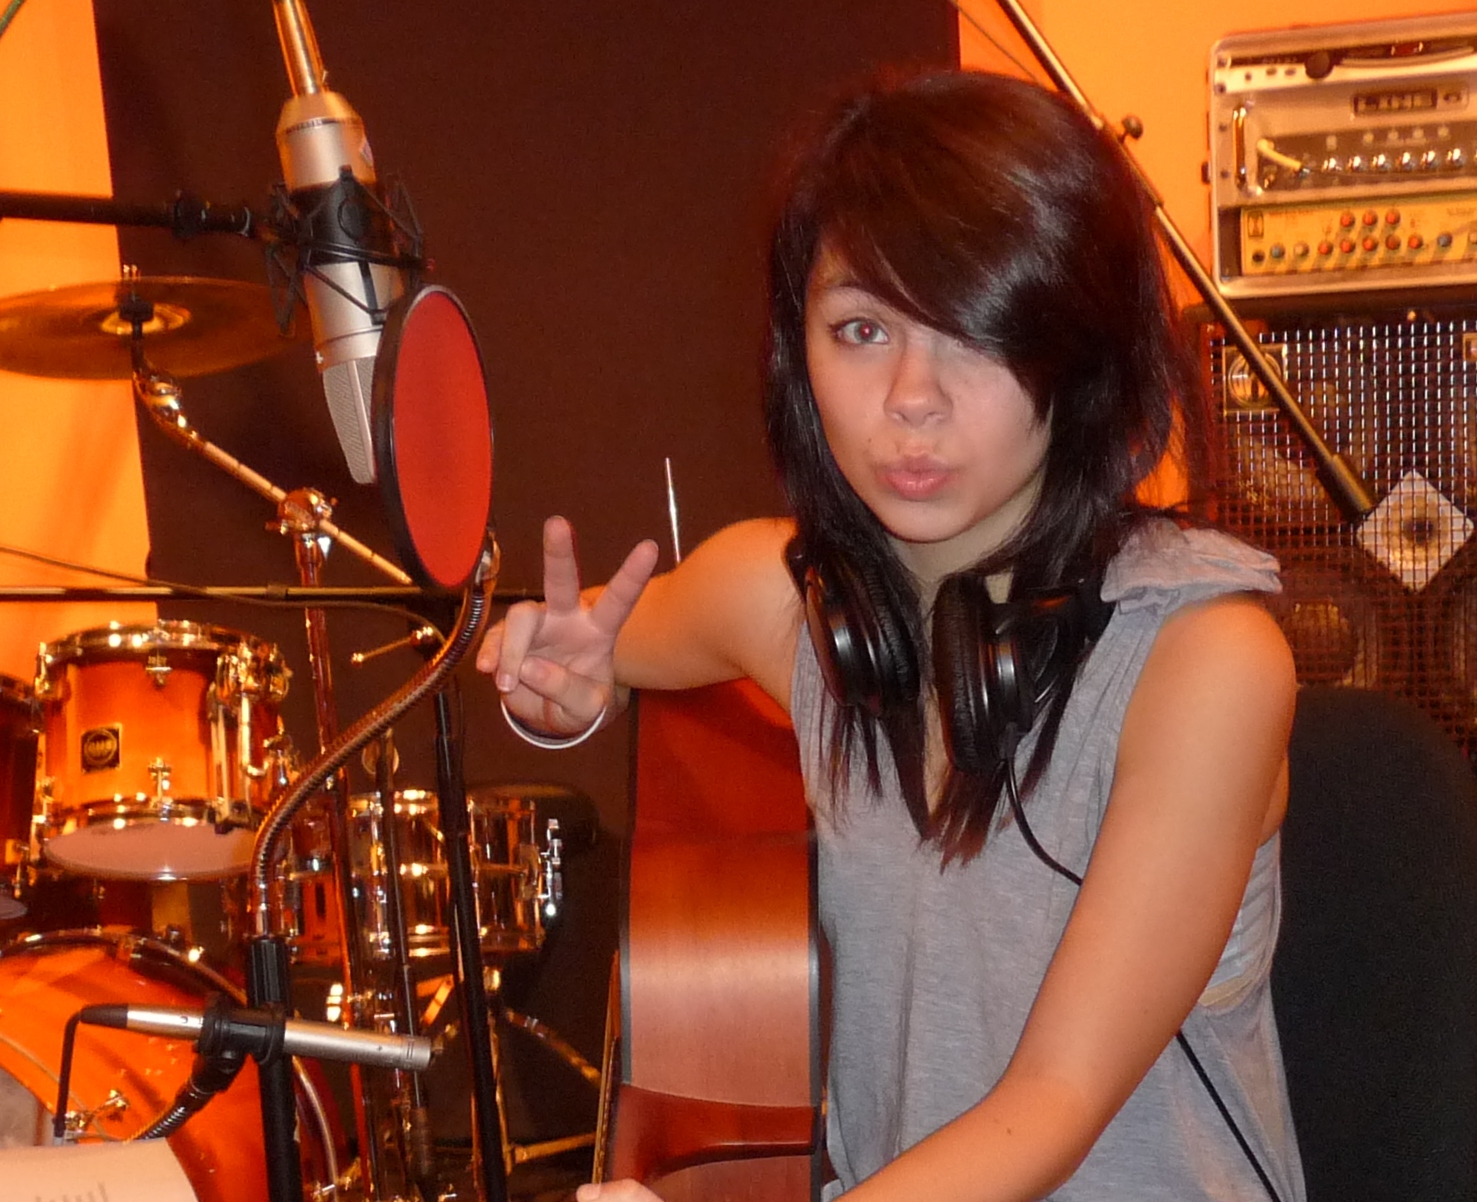 Paris Ray in the studio recording her 1st CD of her original music! Stay tuned for upcoming release!